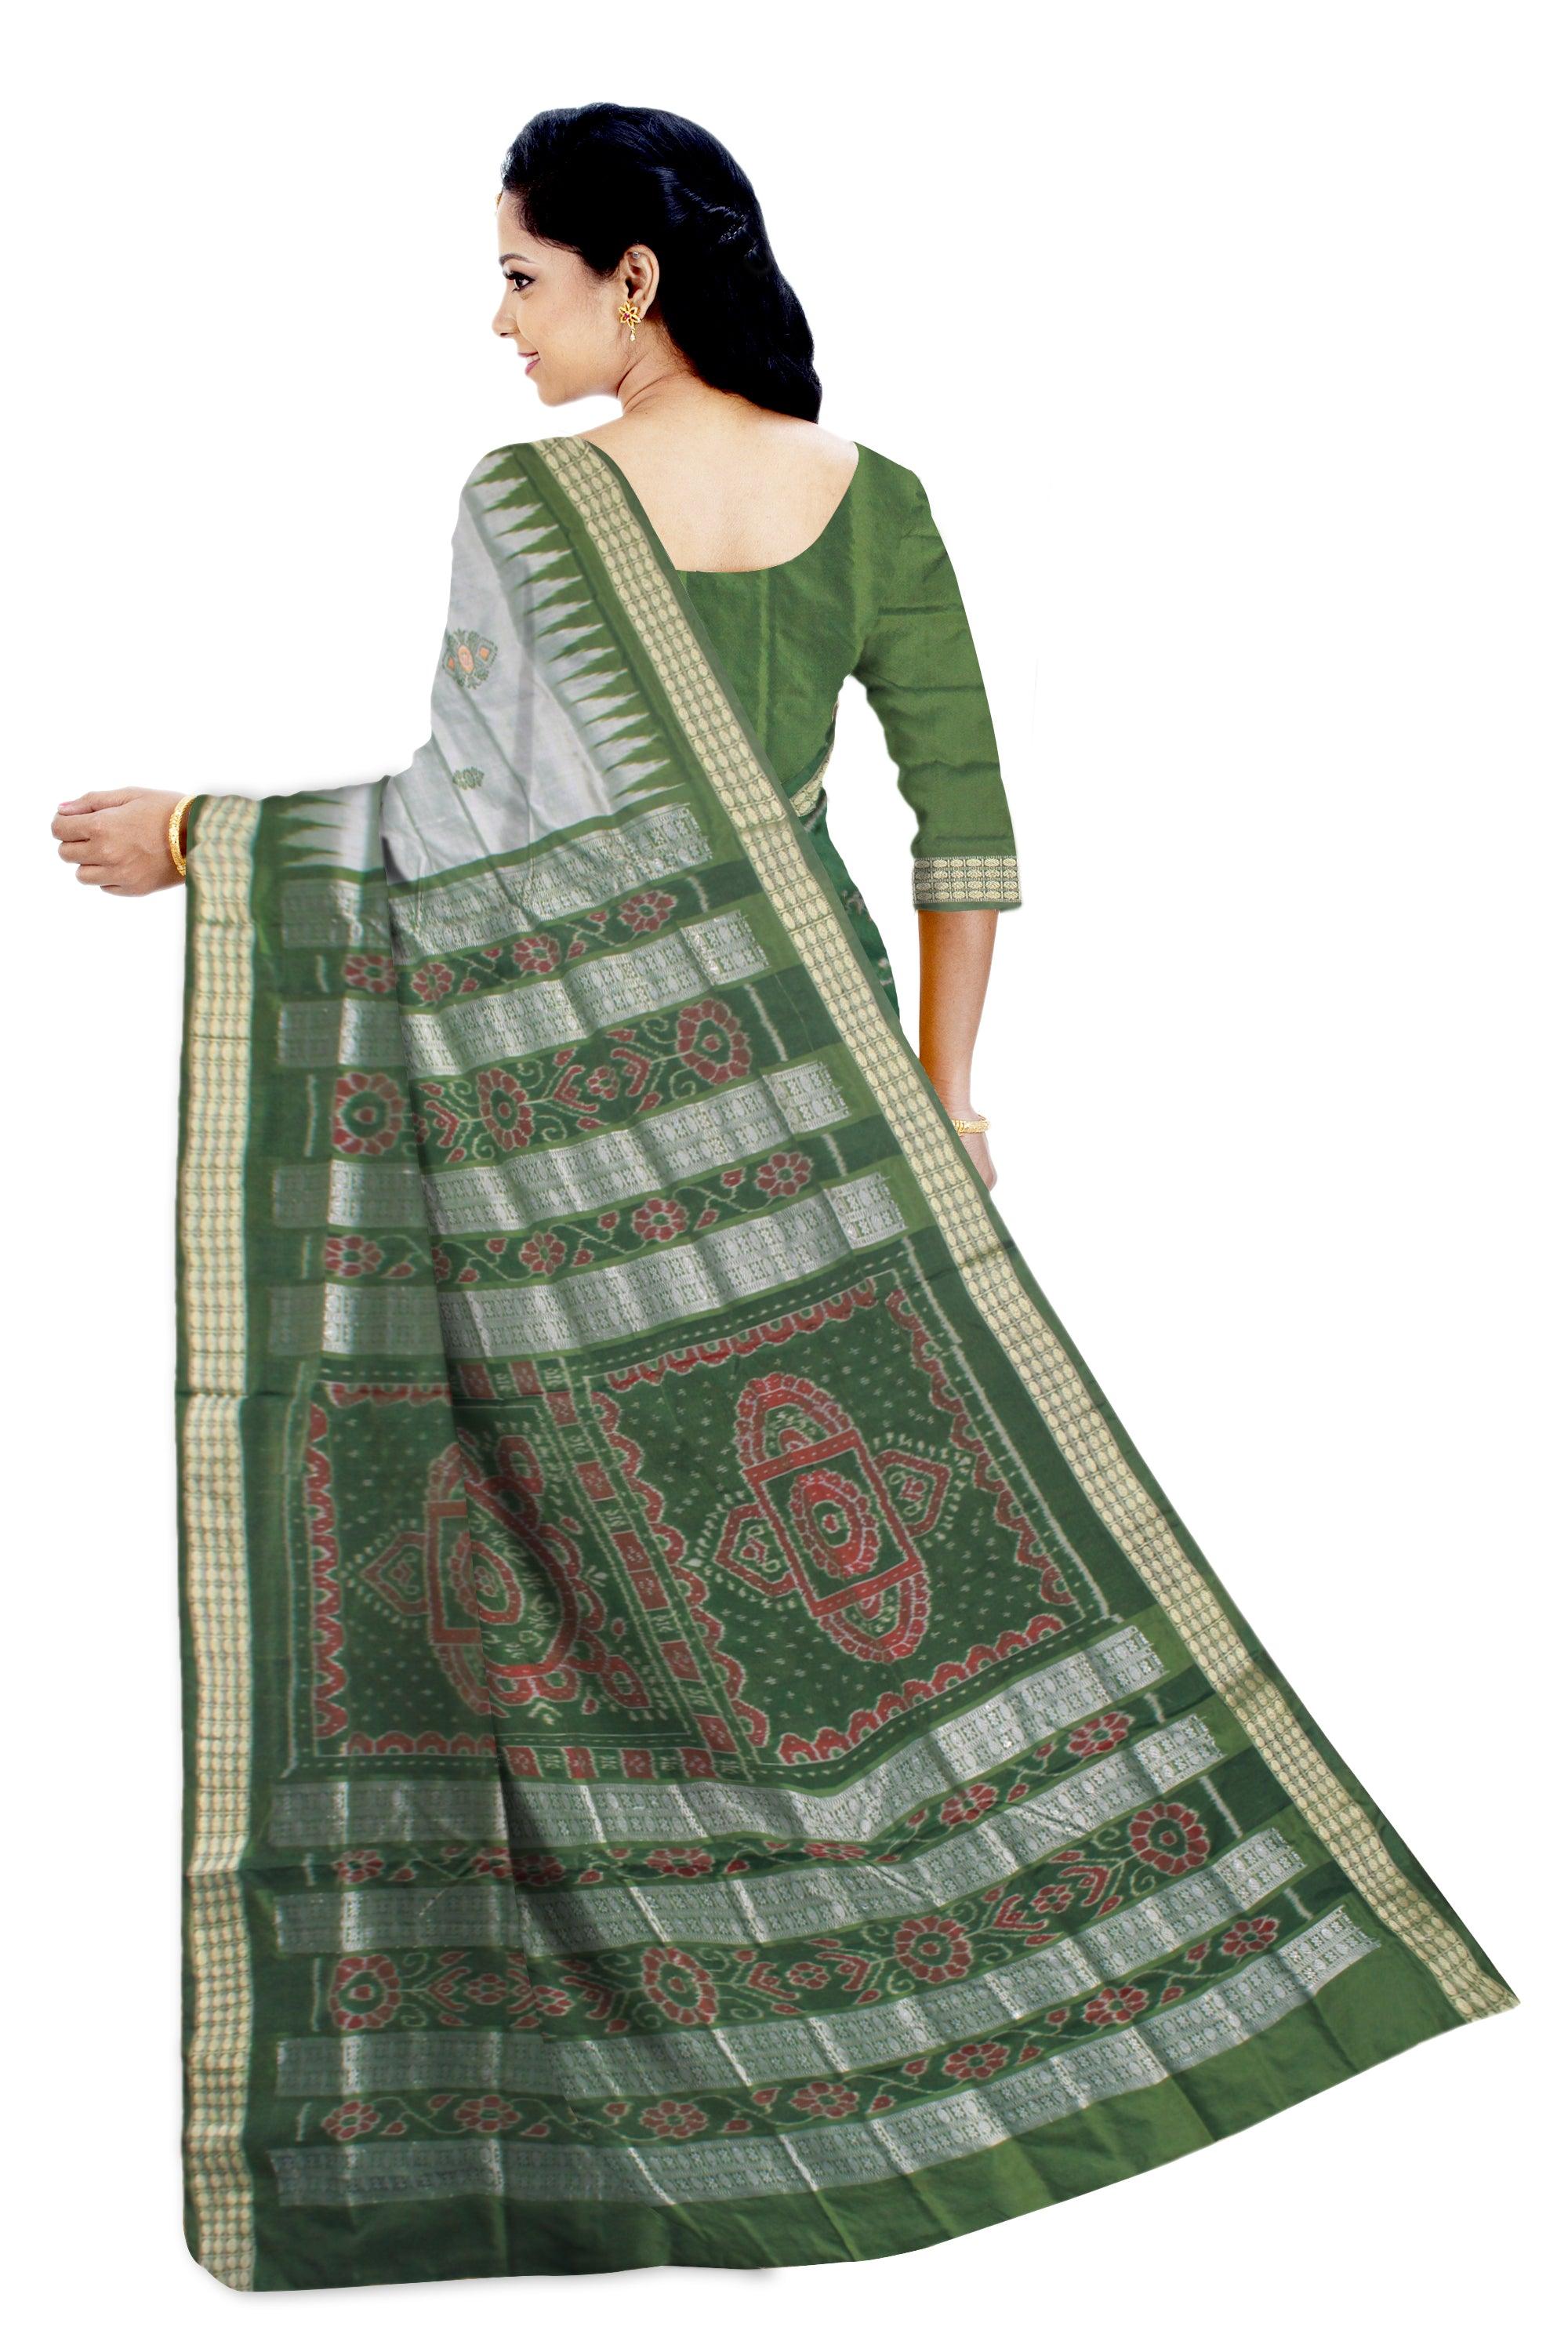 BANDHA PATTERN GREEN SILVER AND LIGHT GREEN COLOR SILK SAREE, ATTACHED WITH BLOUSE PIECE. - Koshali Arts & Crafts Enterprise